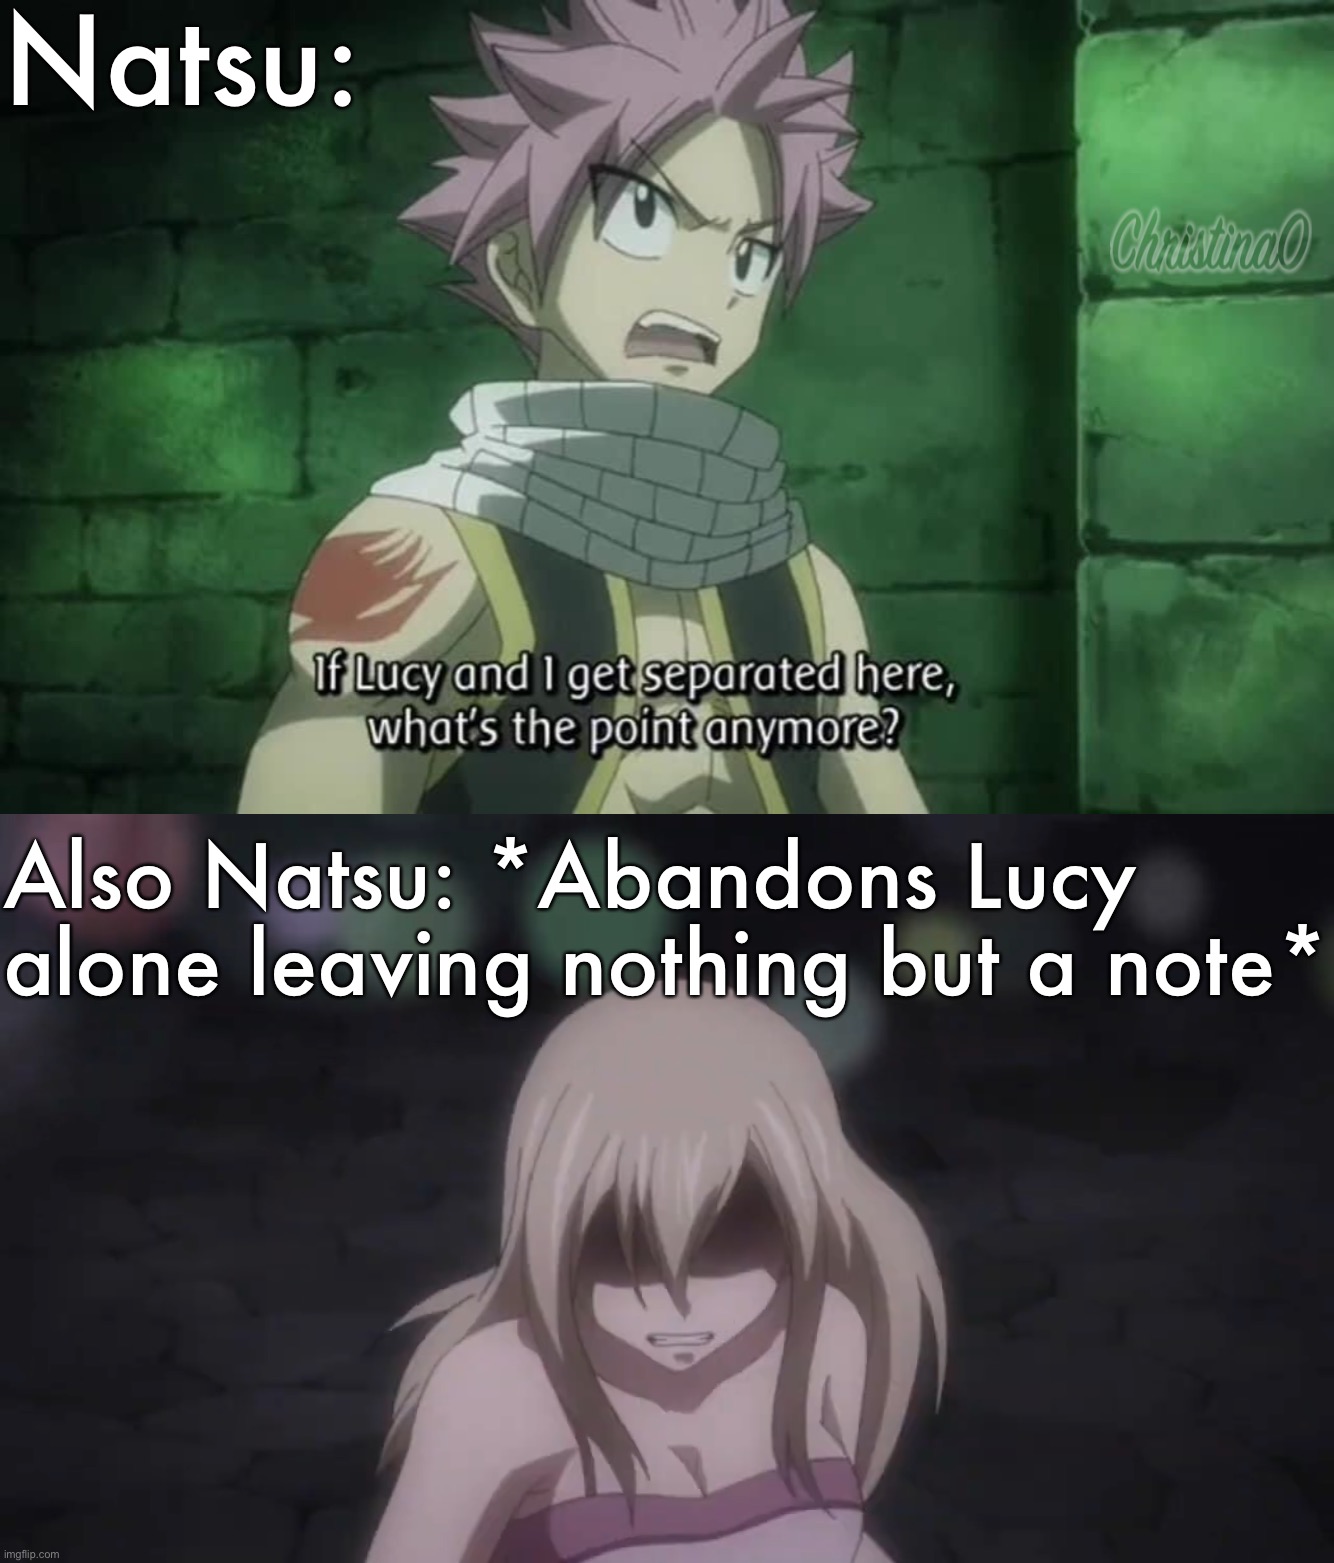 Natsu Leaves Lucy for One Year - Fairy Tail Meme |  Natsu:; Also Natsu: *Abandons Lucy alone leaving nothing but a note* | image tagged in memes,fairy tail,fairy tail meme,nalu,natsu dragneel,fairy tail memes | made w/ Imgflip meme maker